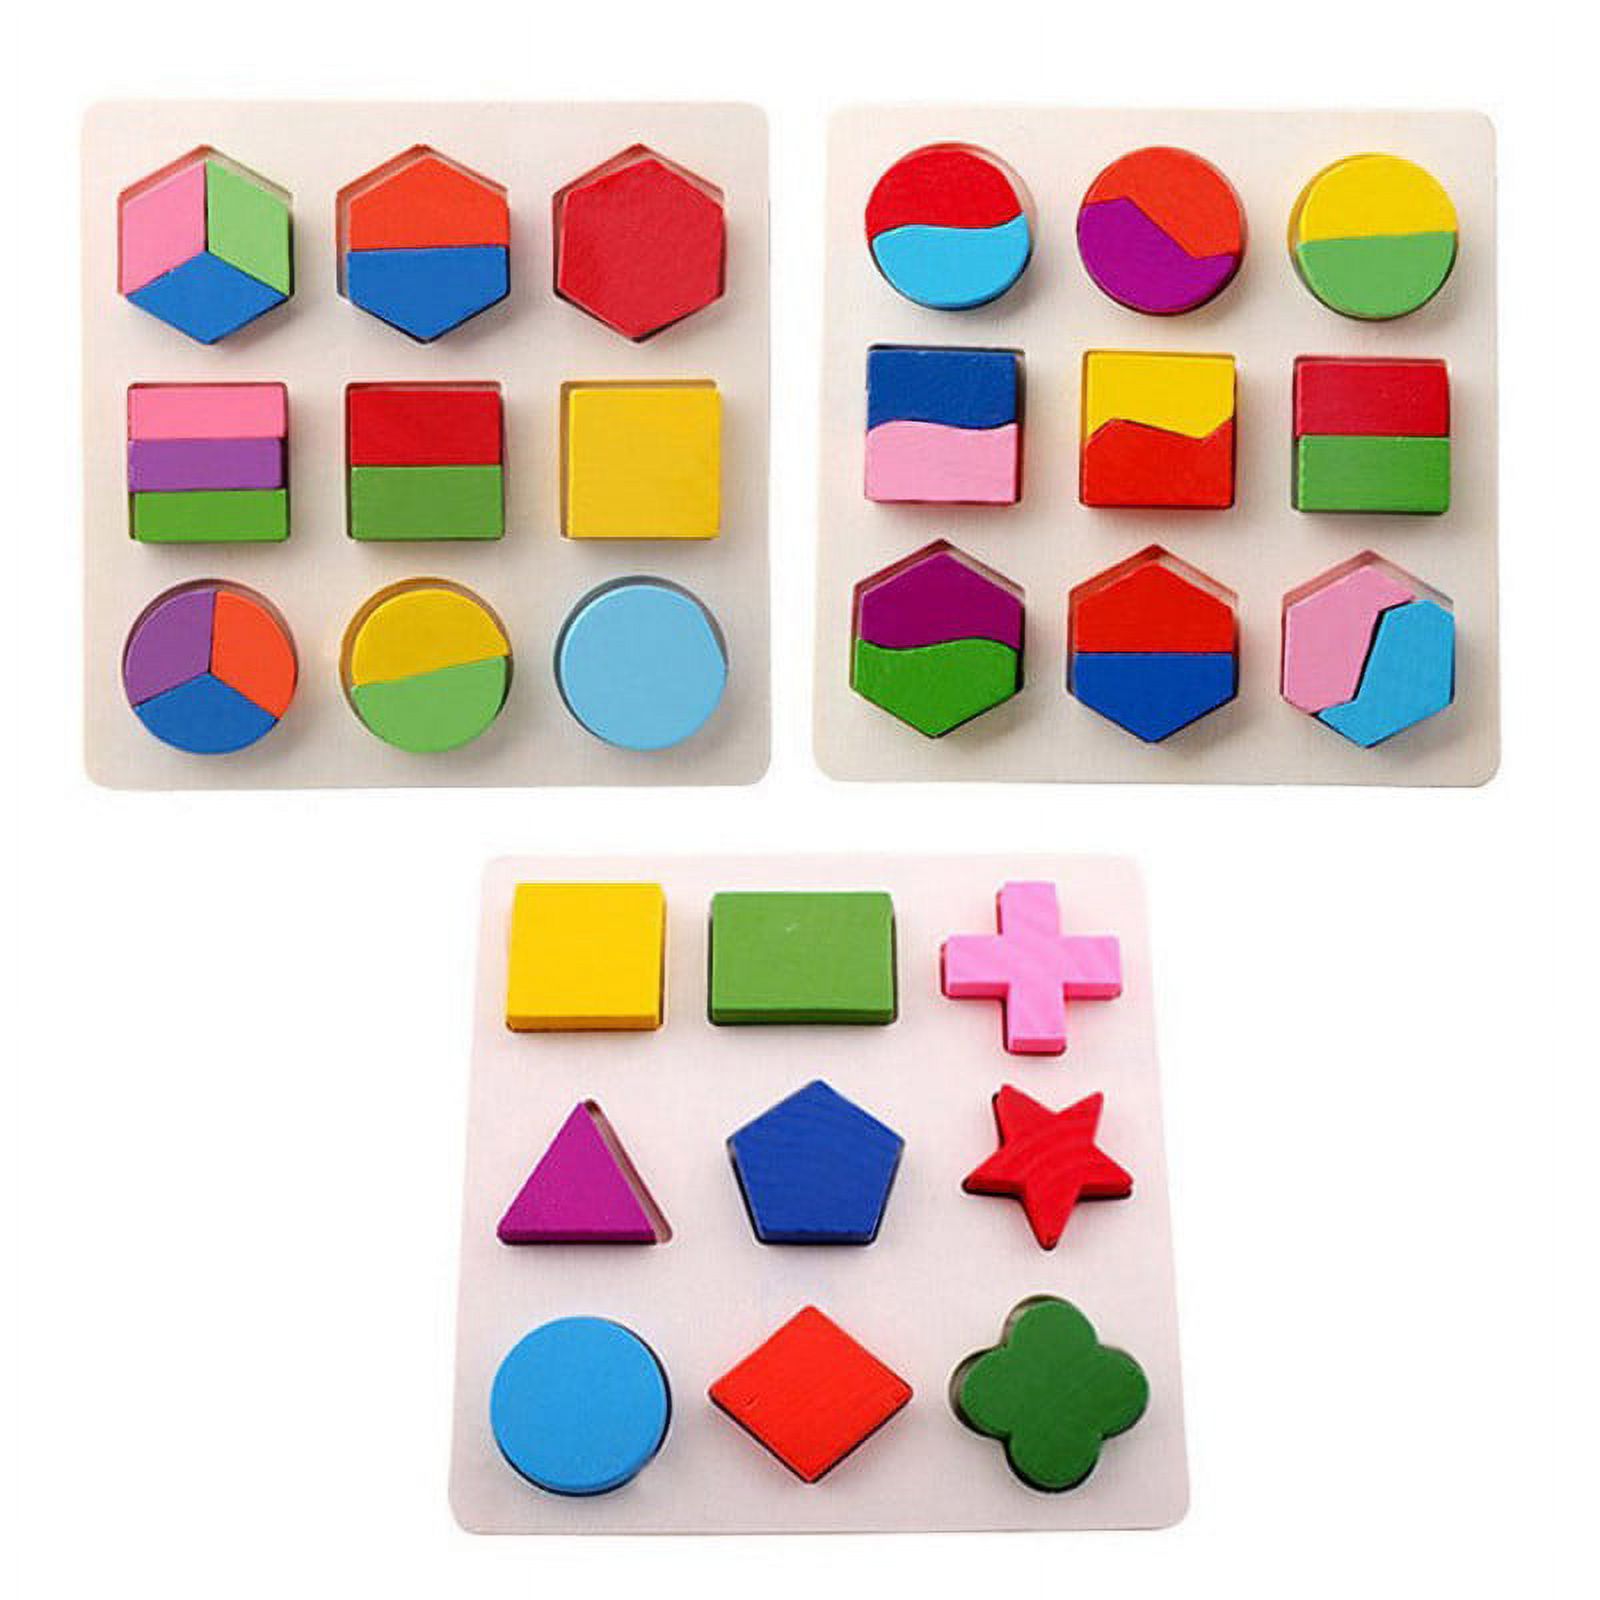 Kids Baby Wooden Geometry Block Puzzle Montessori Early Learning Educational Toy - image 4 of 5